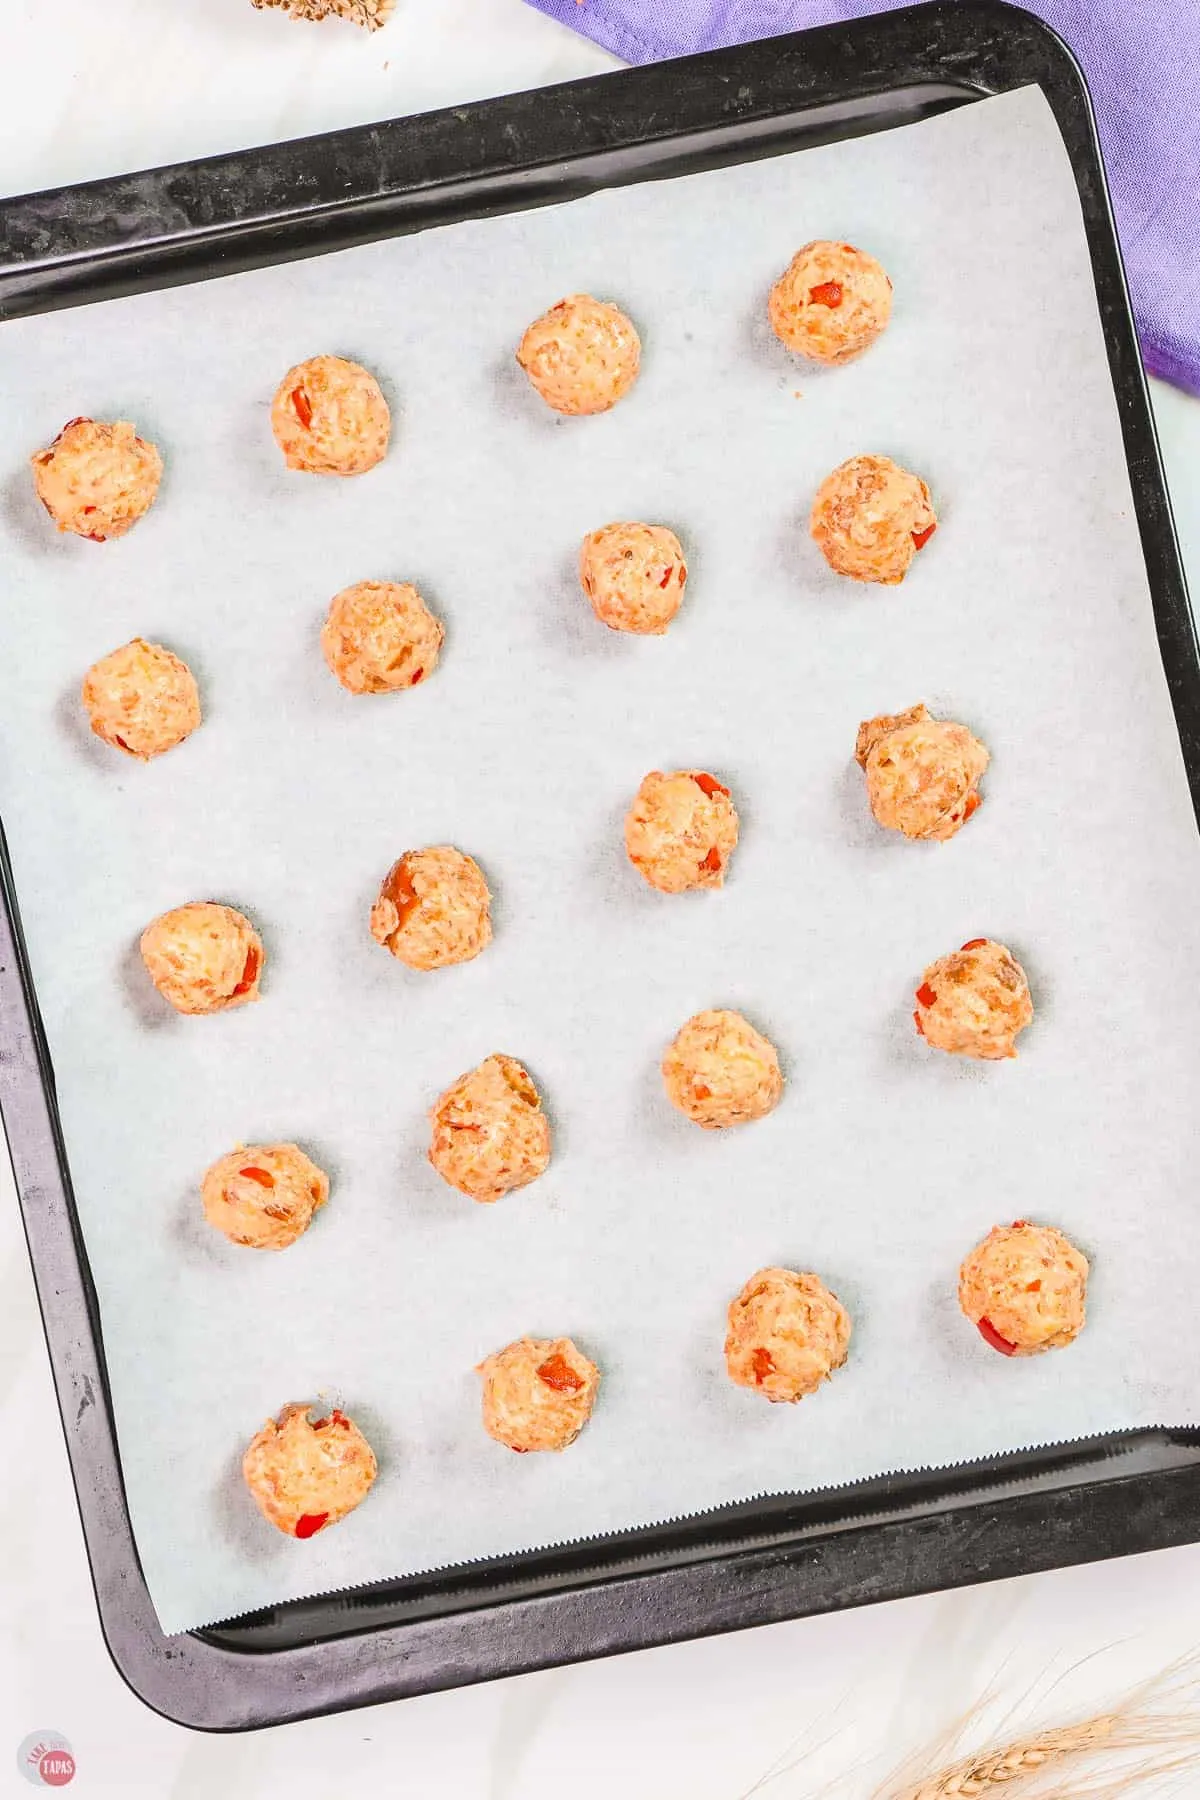 unbaked pimento cheese sausage balls on a baking sheet lined with parchment paper